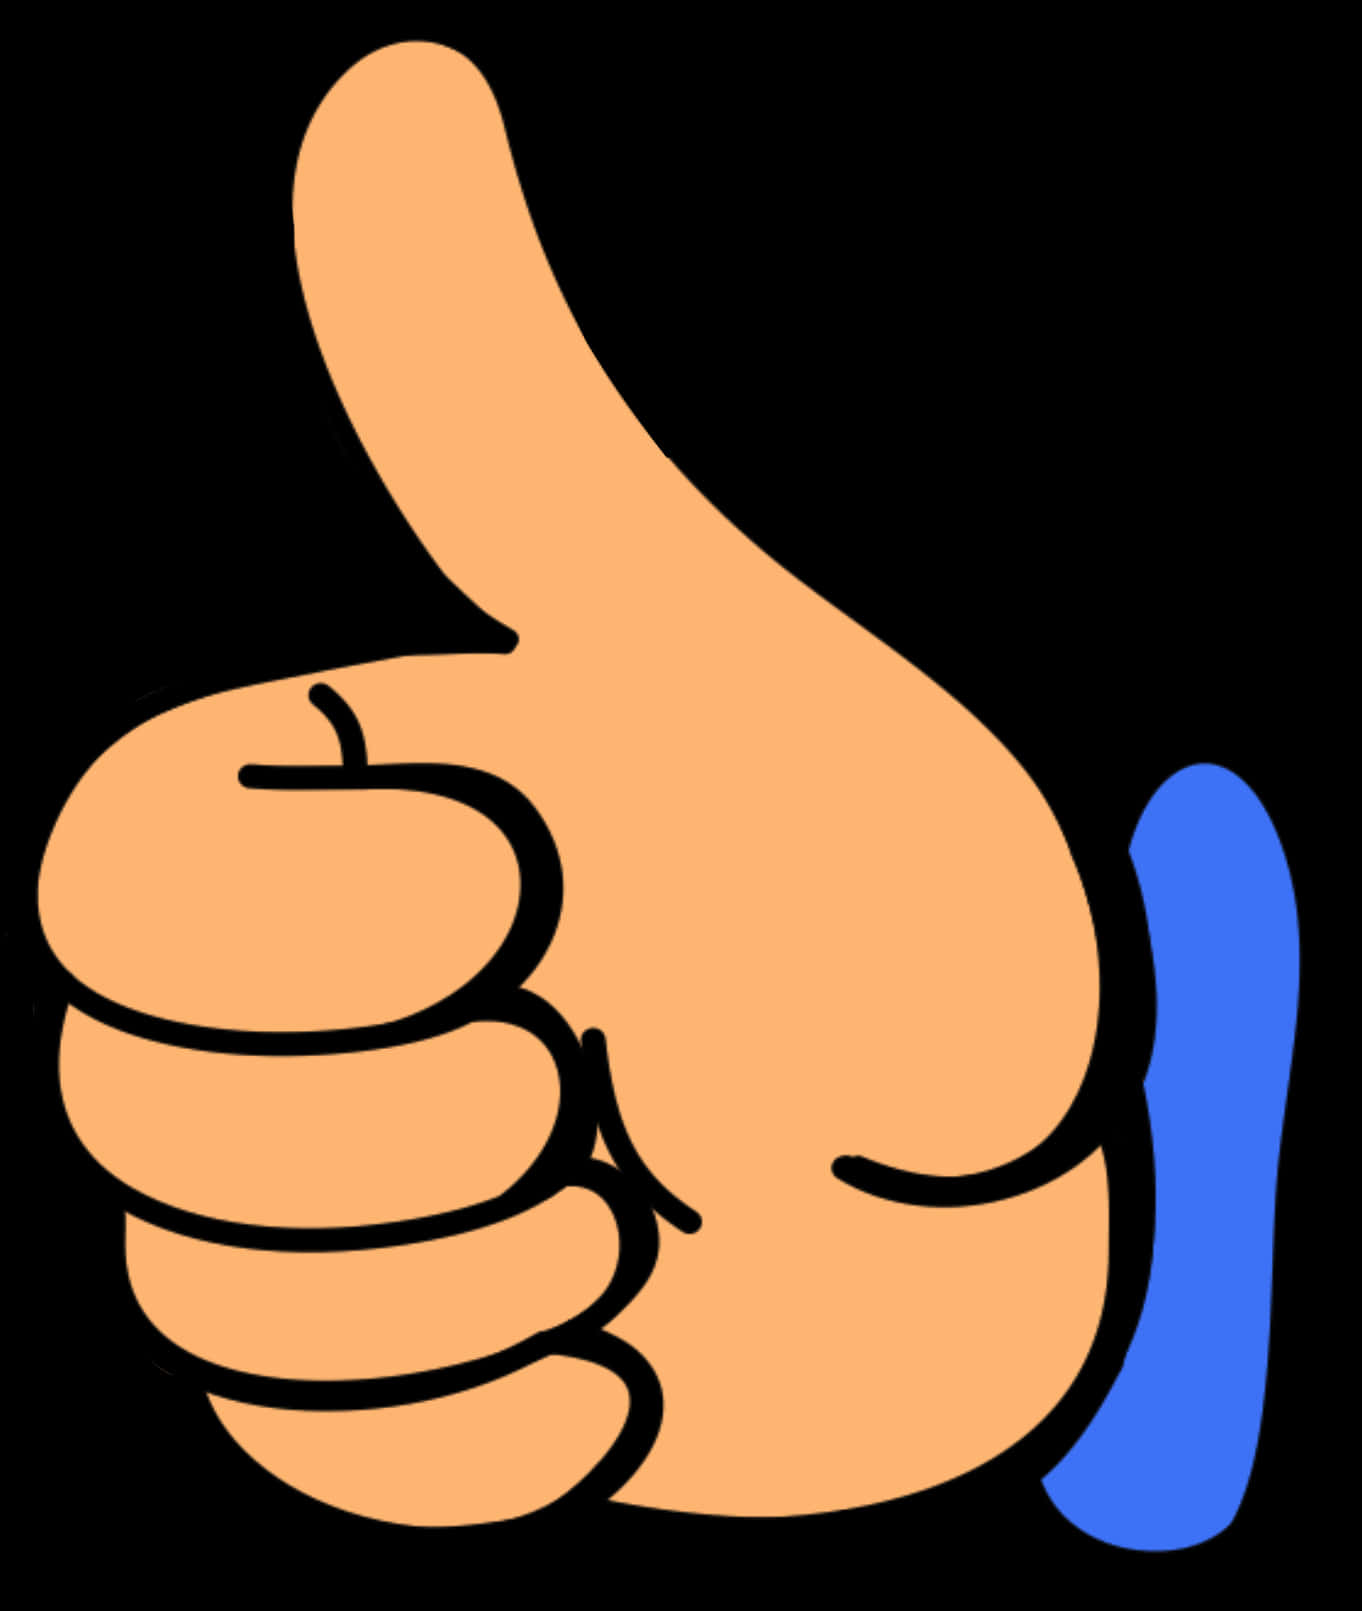 Thumbs Up Emoji With Blue Shadow PNG